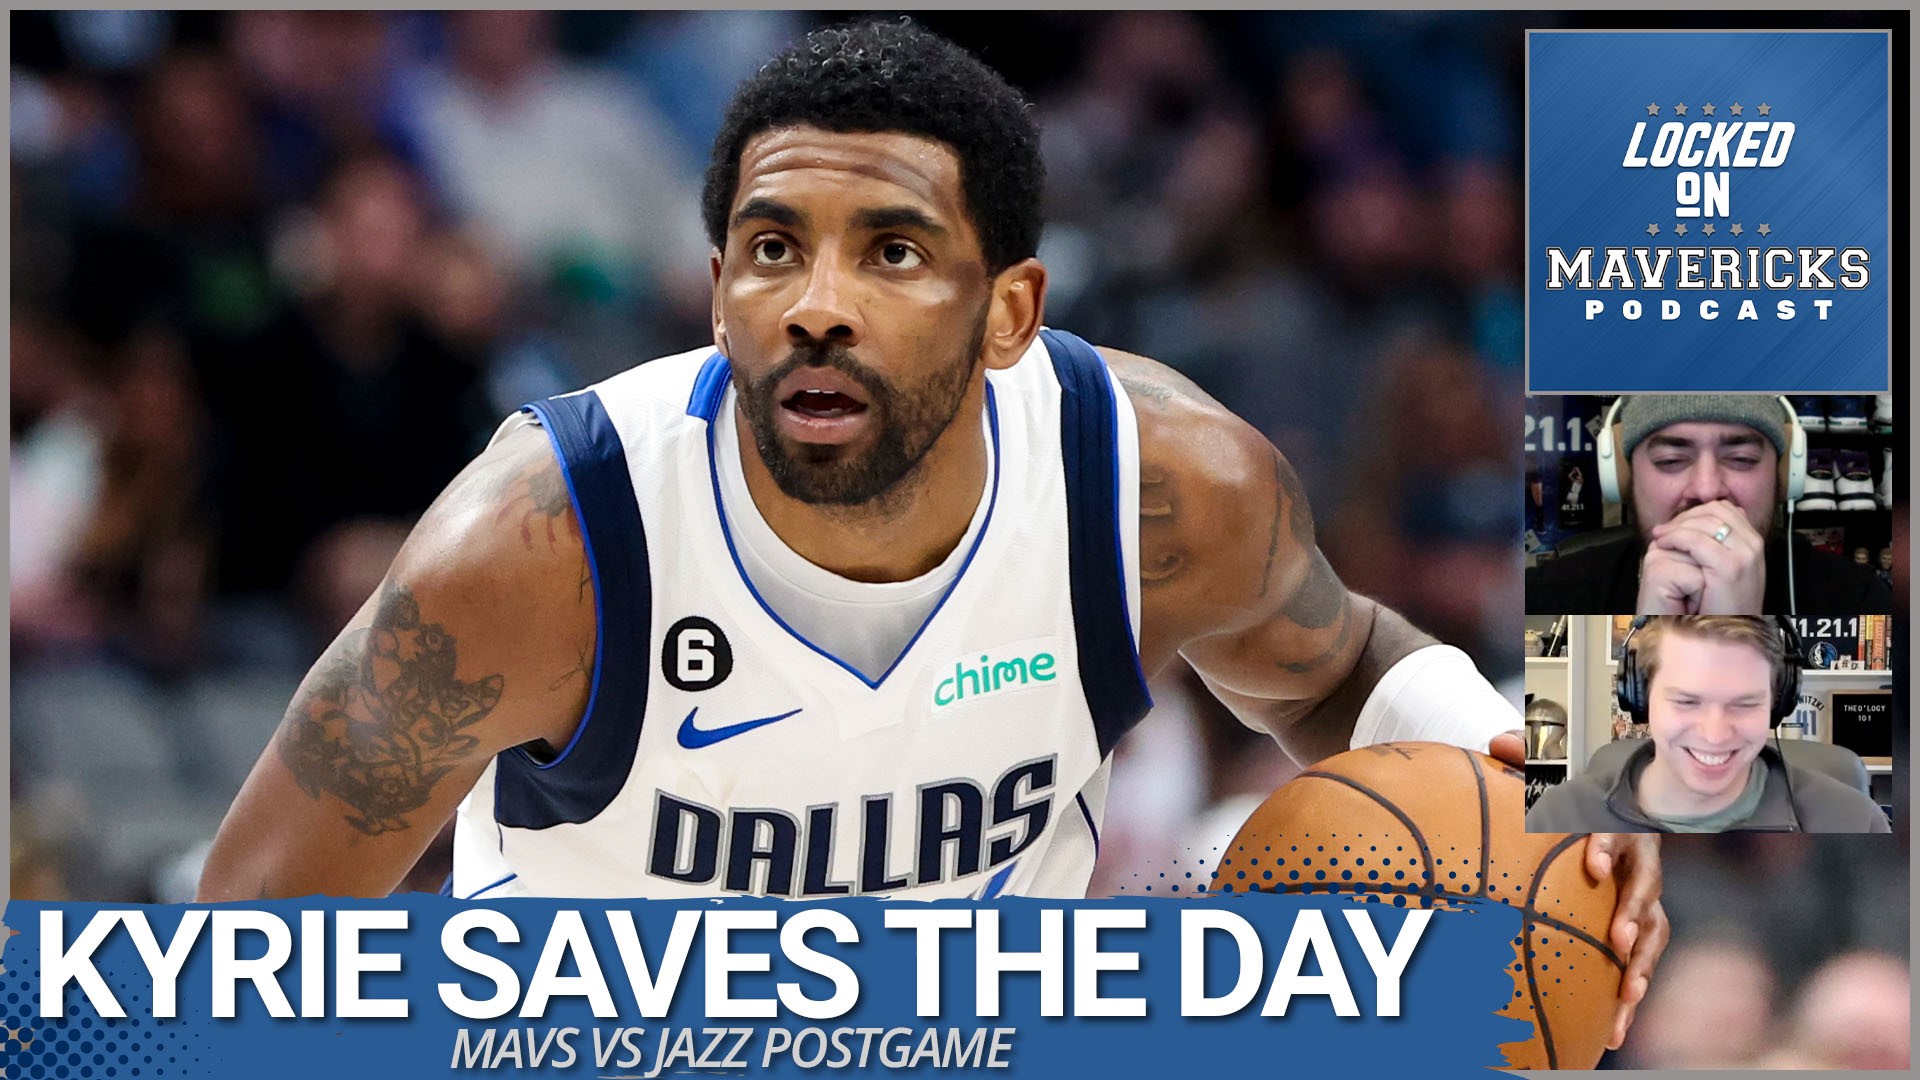 Nick Angstadt & Isaac Harris breakdown the Mavs win over the Jazz and why it didn't instill a lot of confidence in this group.